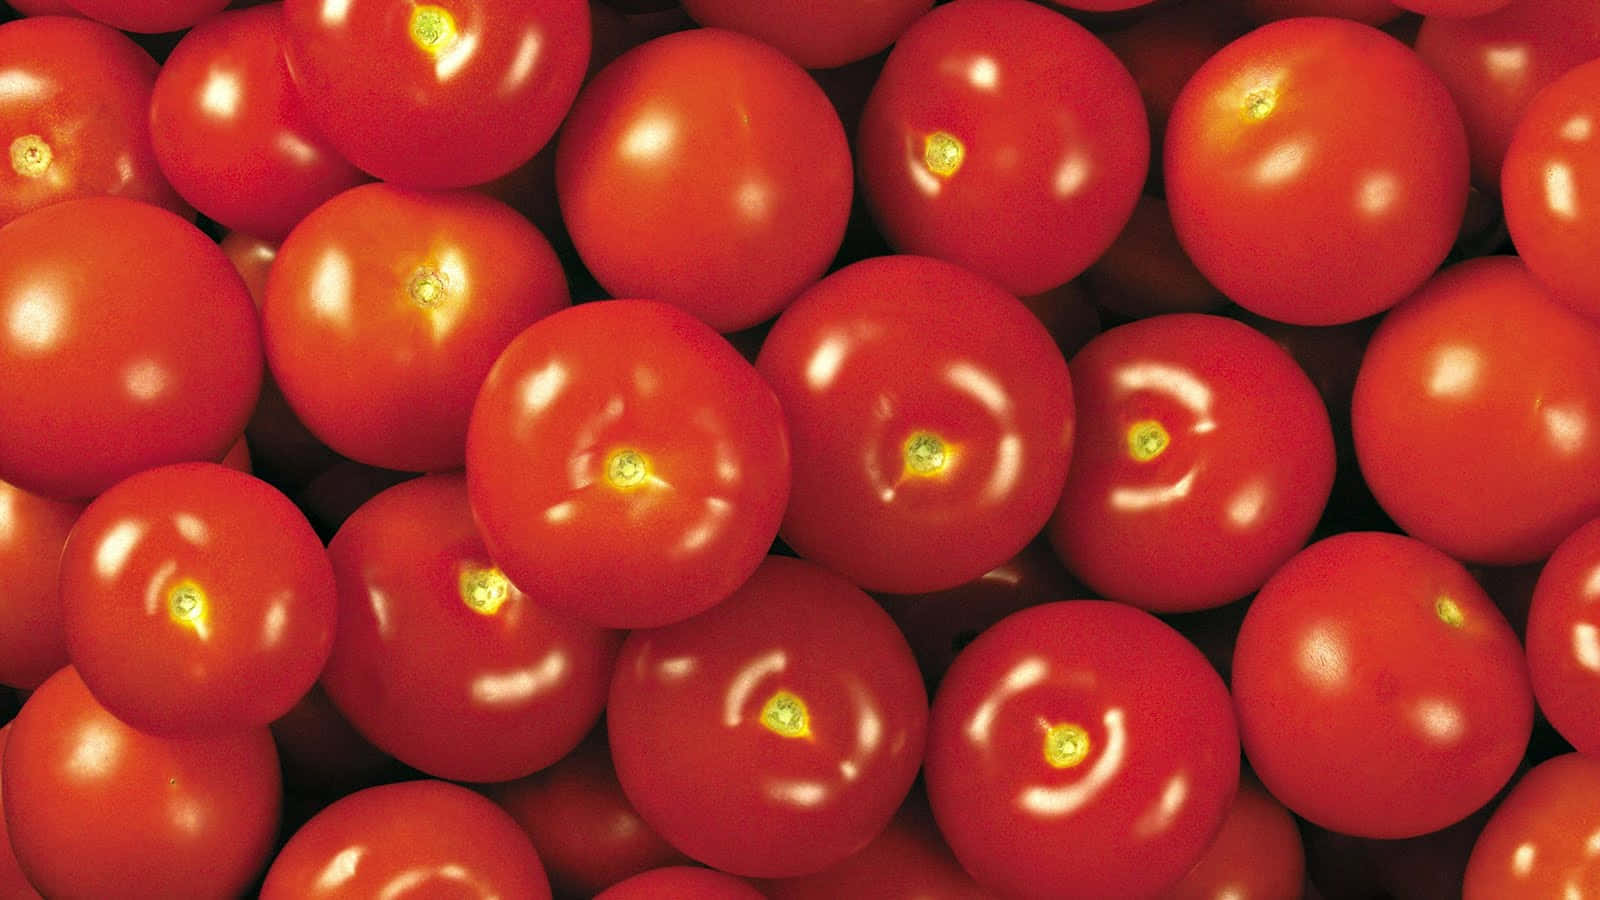 Colorful, Delicious Tomatoes